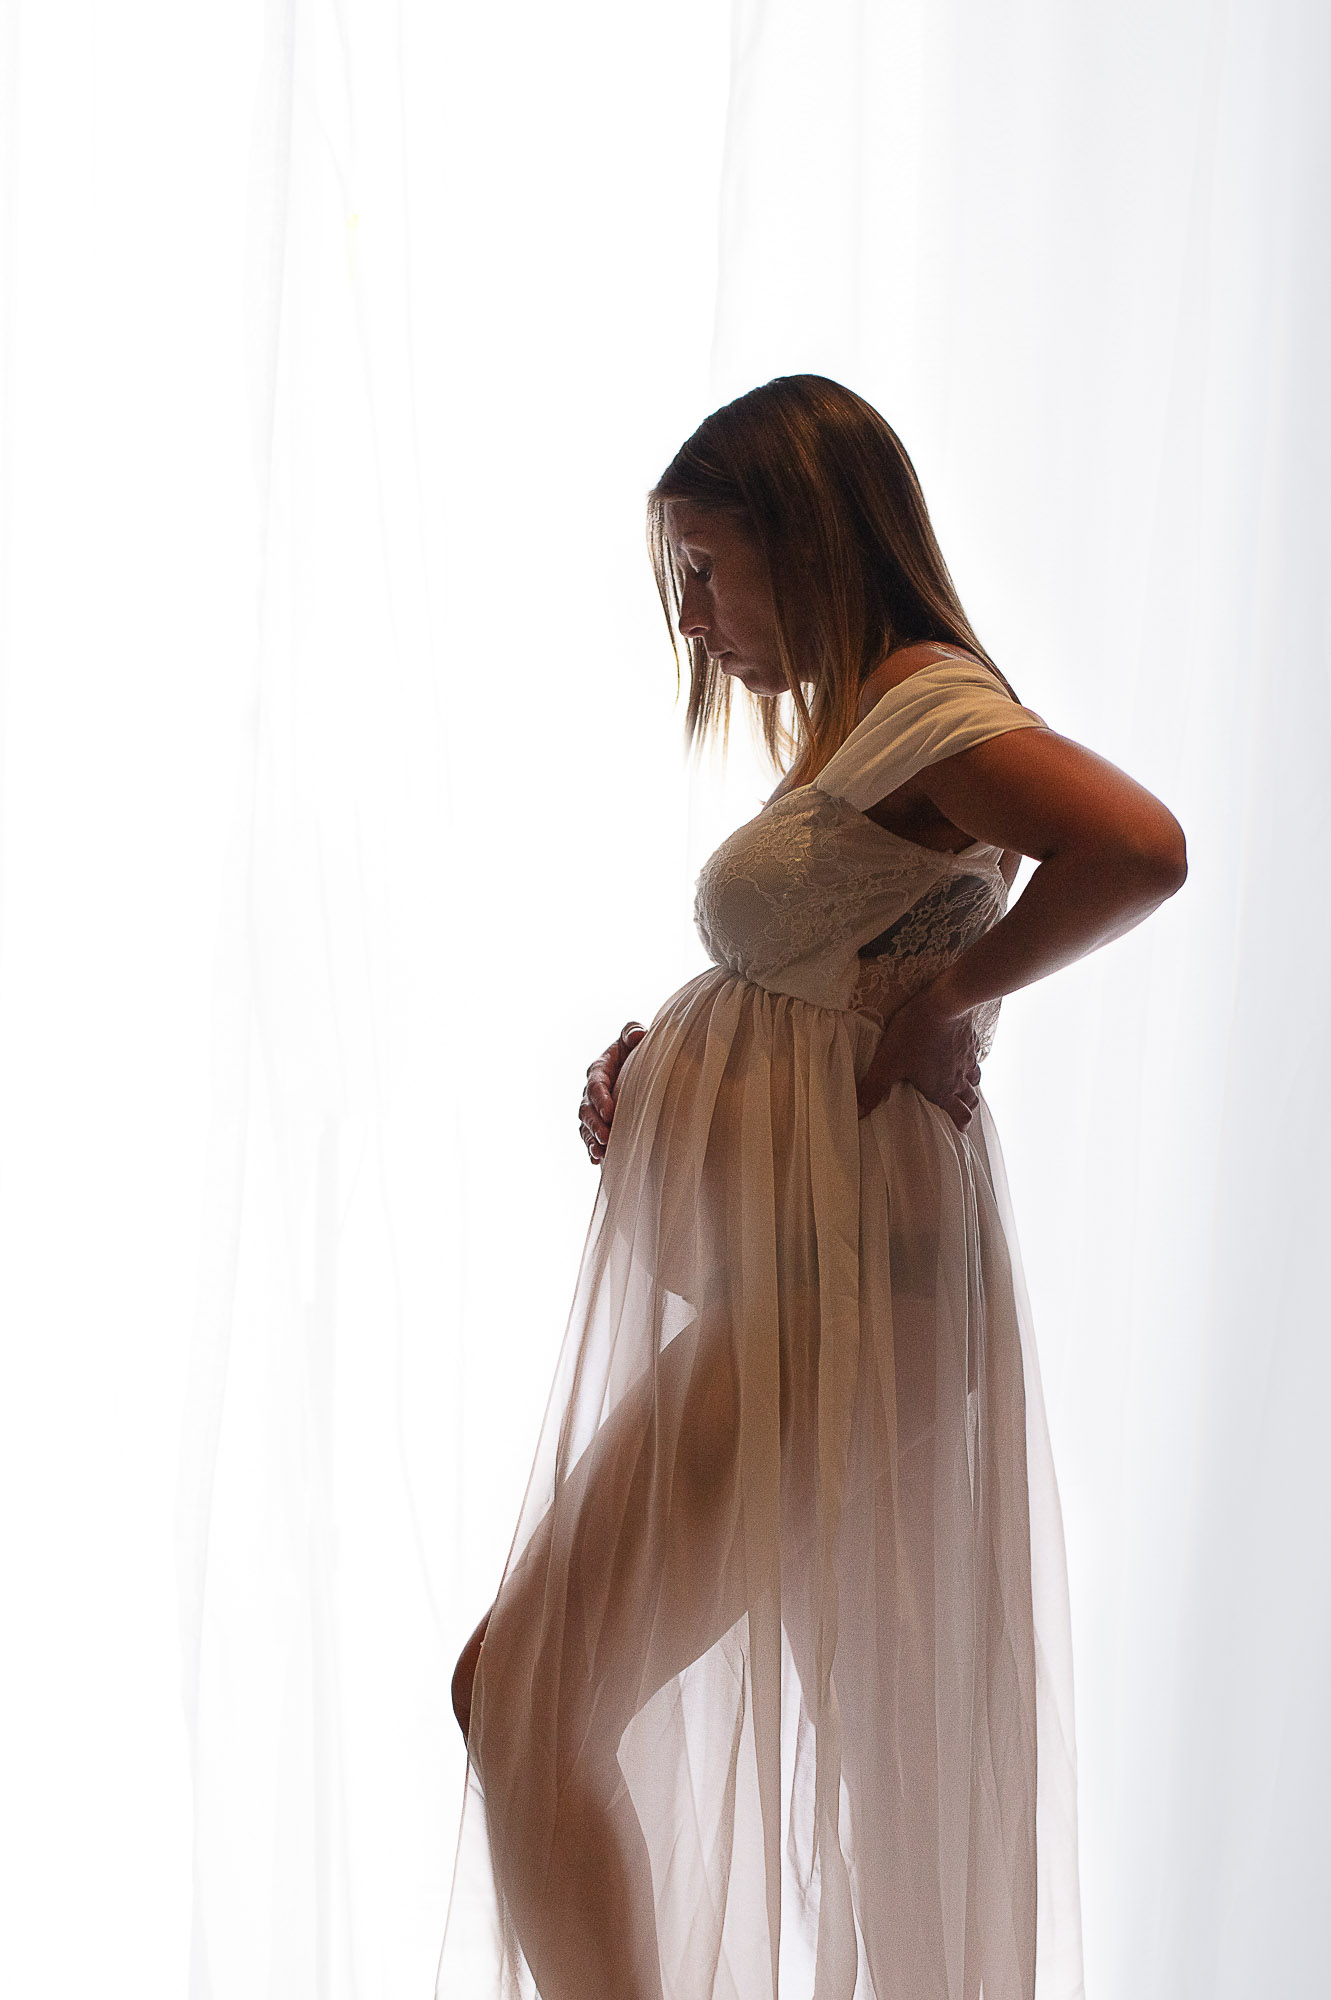 Haslemere woman maternity photo shoot